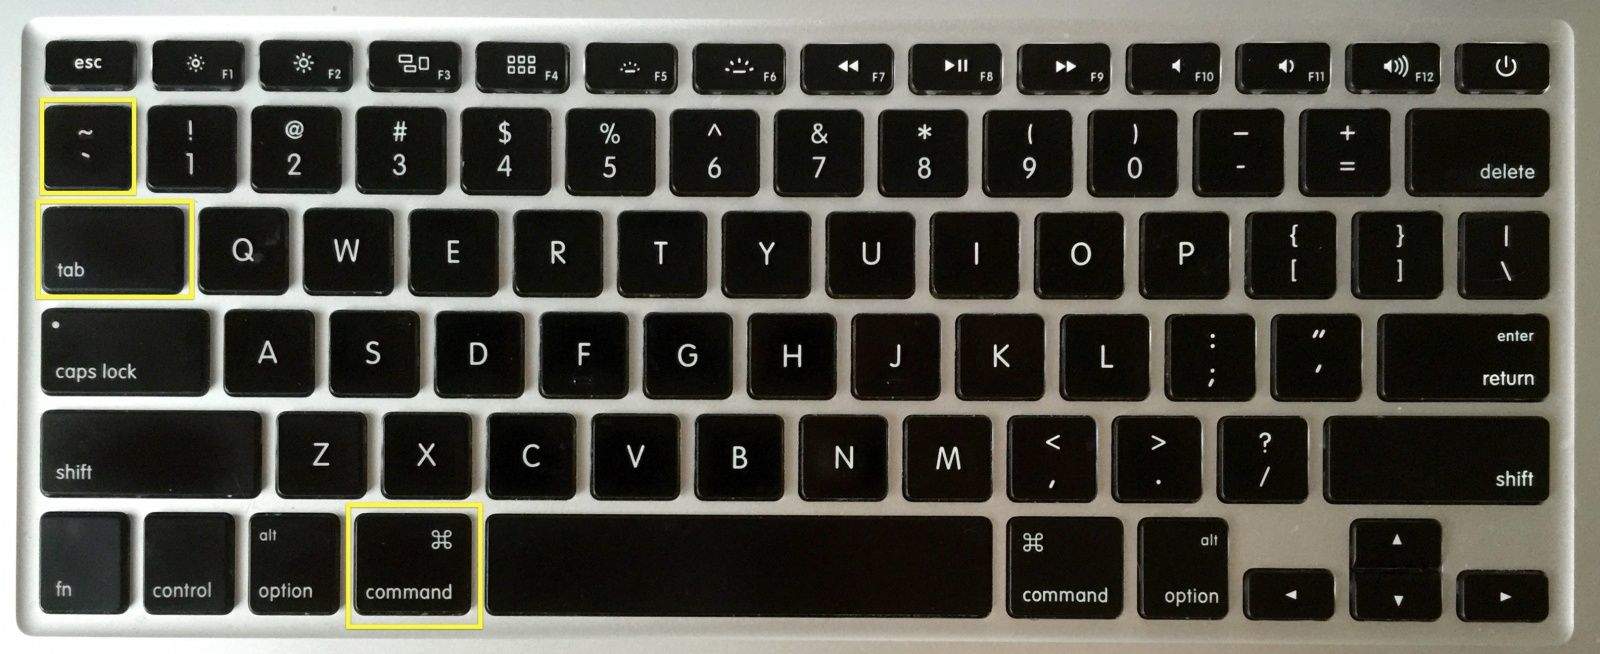 which key acts as the control key on a mac for access